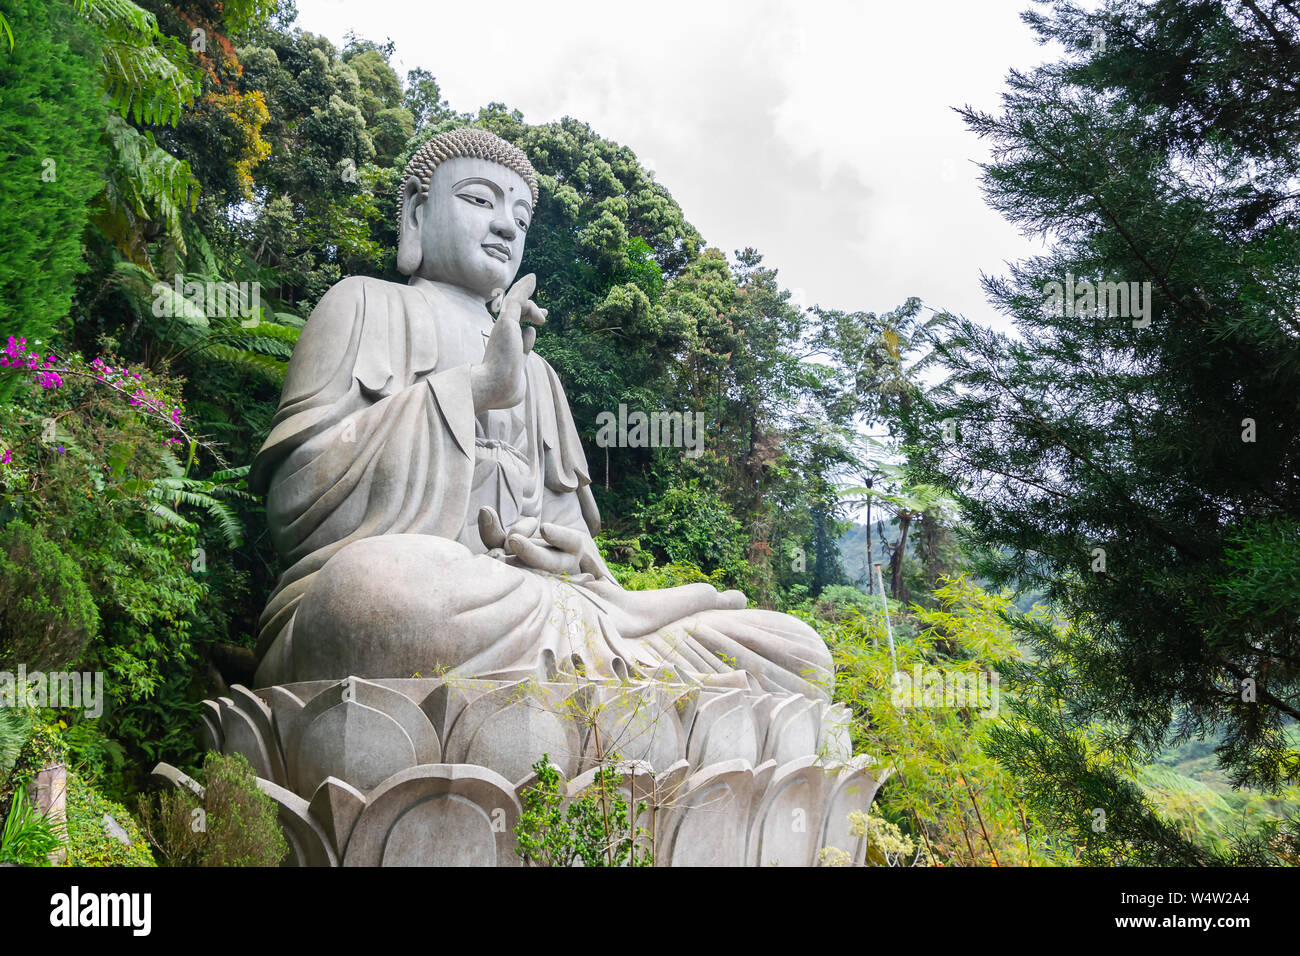 The iconic view of Large Stone Buddha Statue at Chin Swee Caves Temple, the Taoist temple in Genting Highlands, Pahang, Malaysia Stock Photo